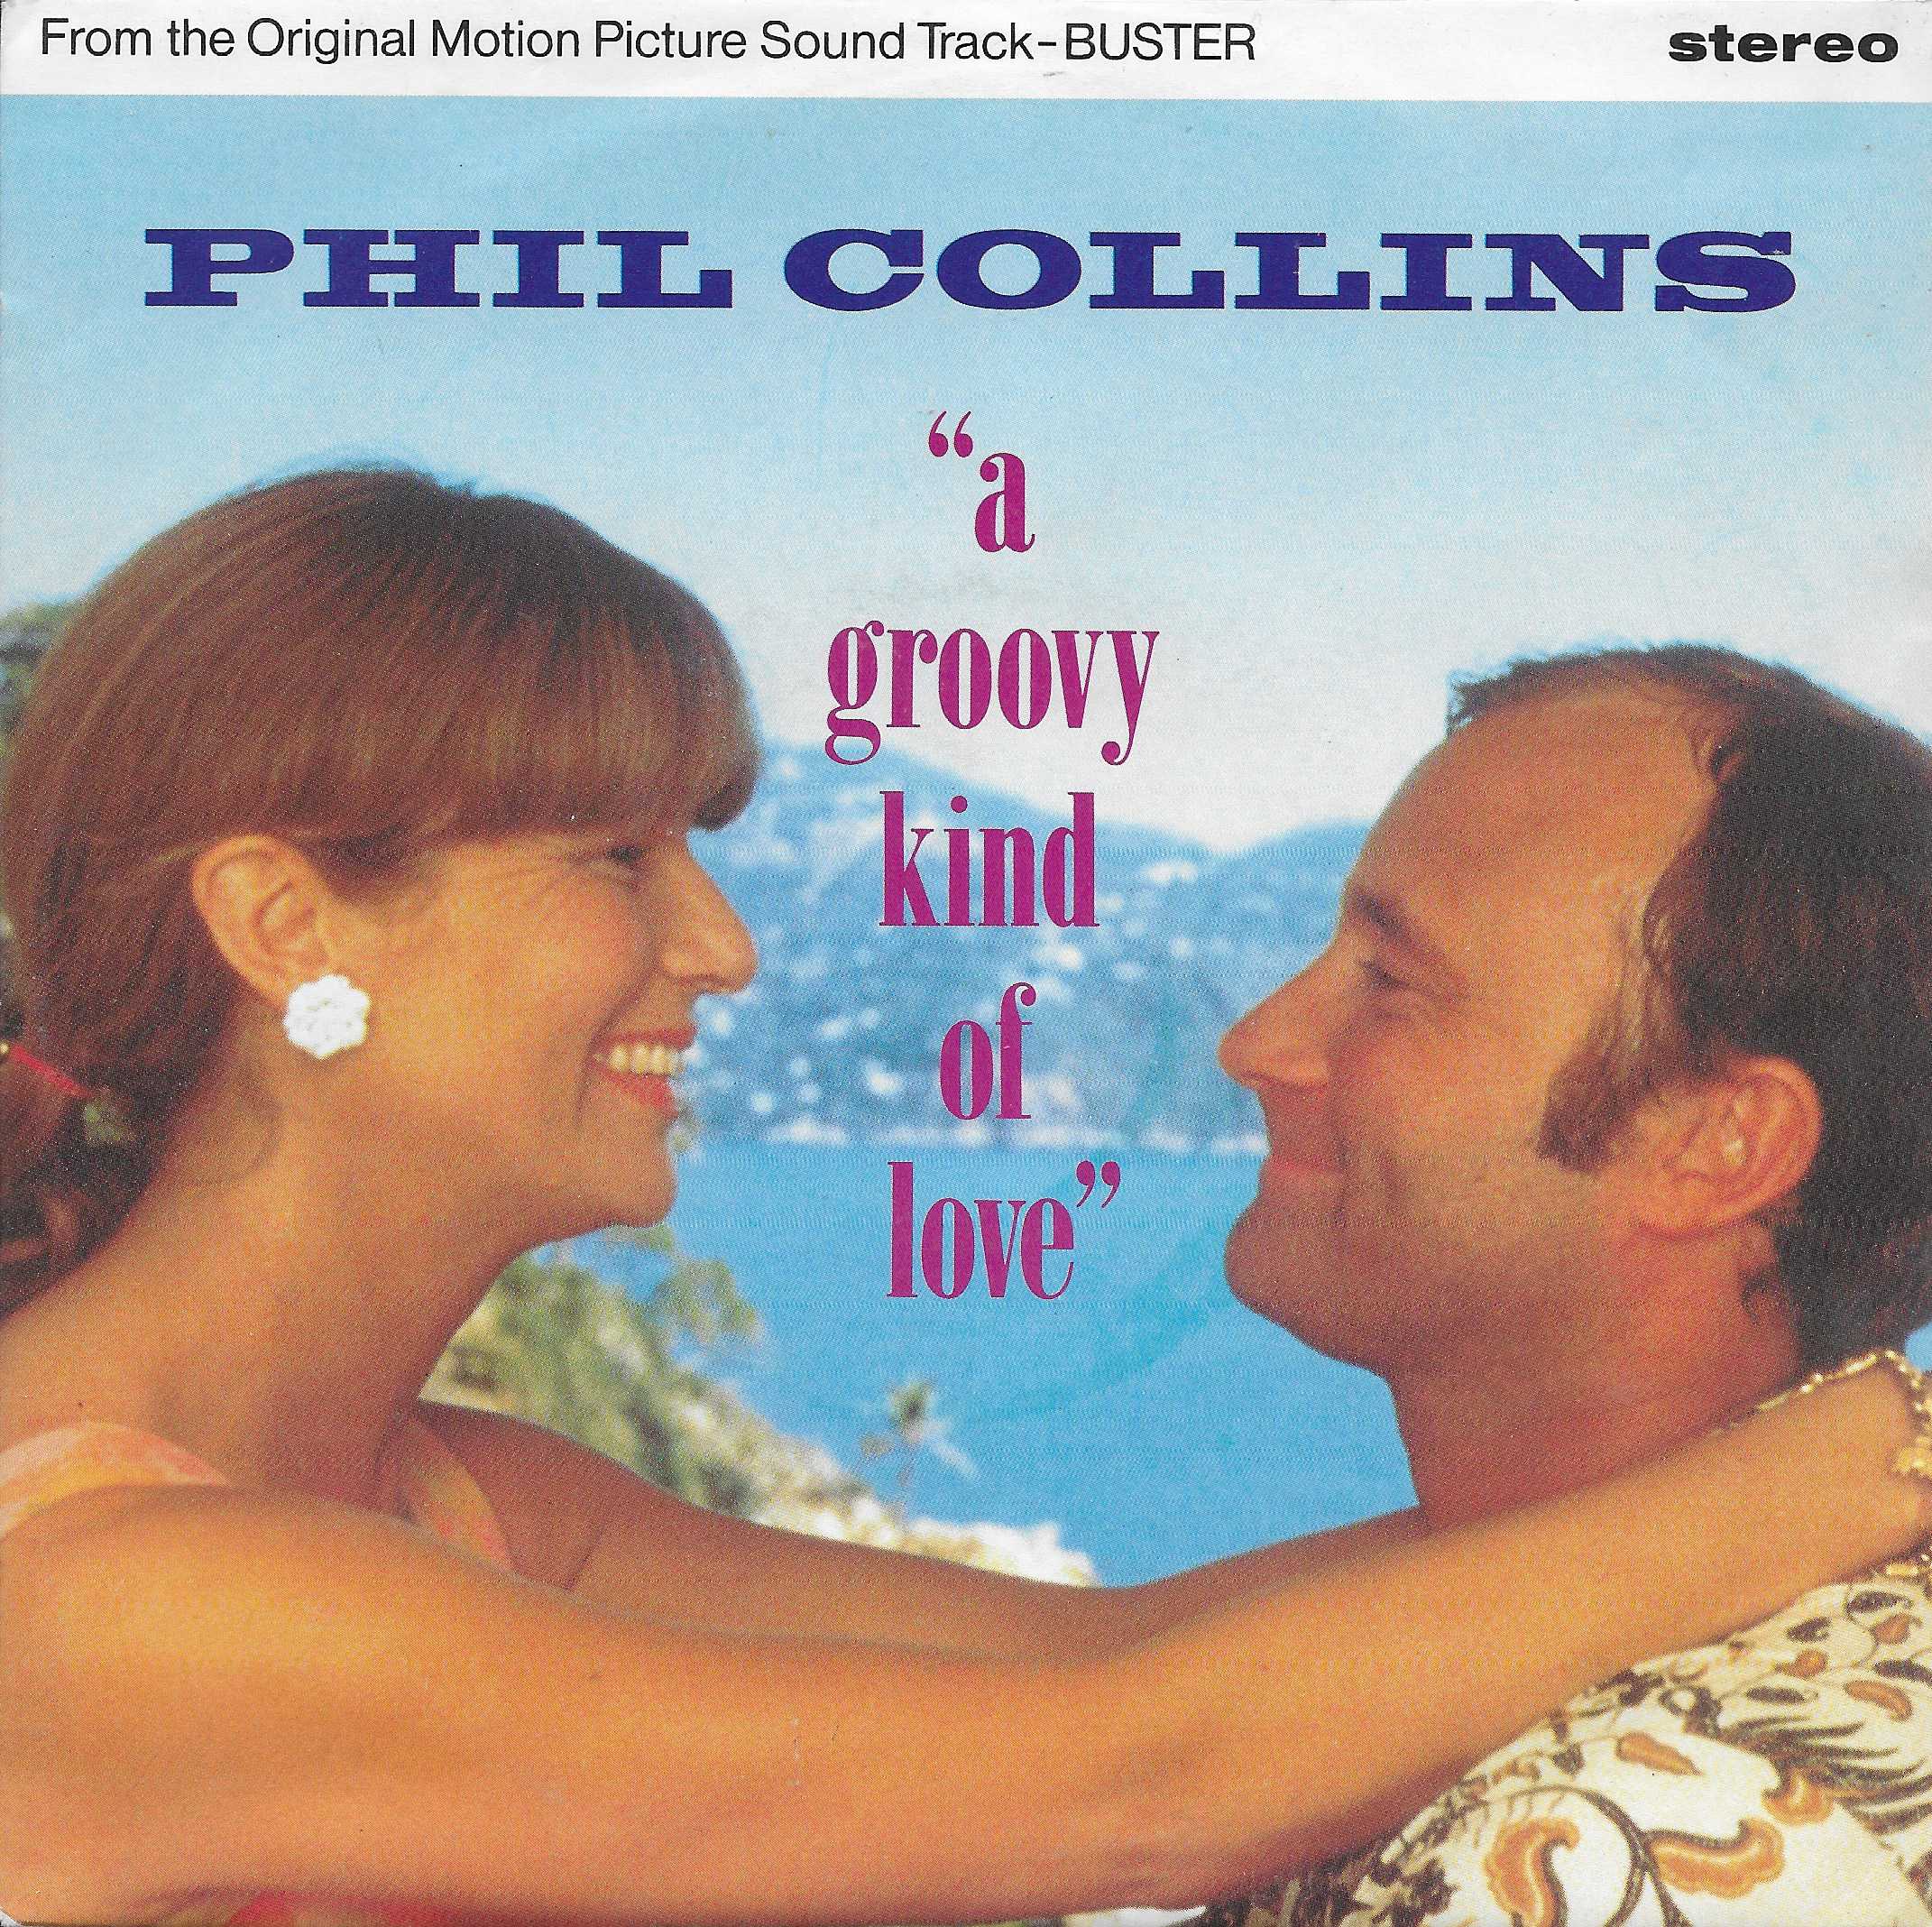 Picture of A groovy kind of love (Buster) by artist Phil Collins from ITV, Channel 4 and Channel 5 singles library